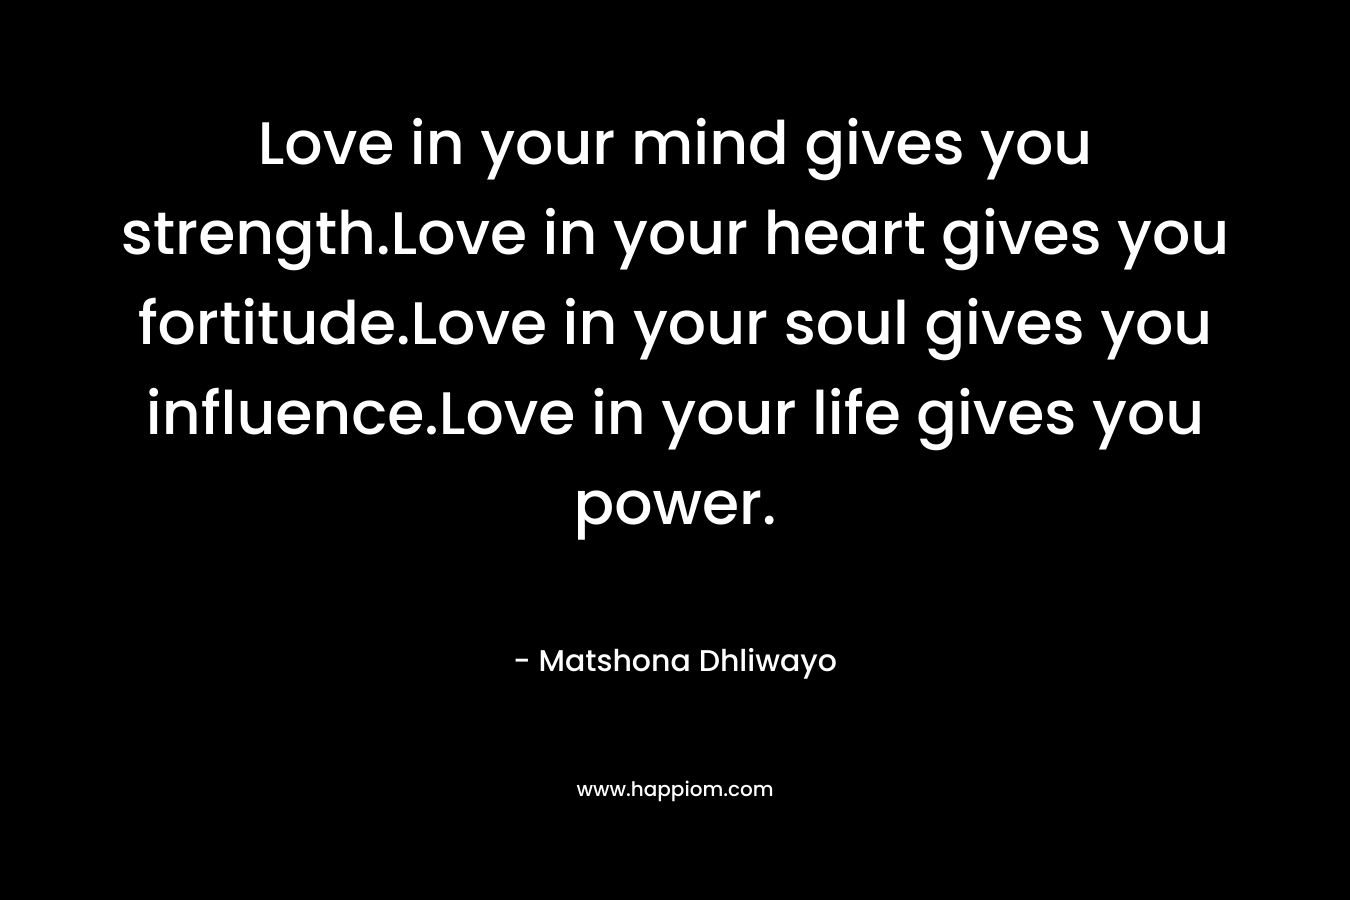 Love in your mind gives you strength.Love in your heart gives you fortitude.Love in your soul gives you influence.Love in your life gives you power.